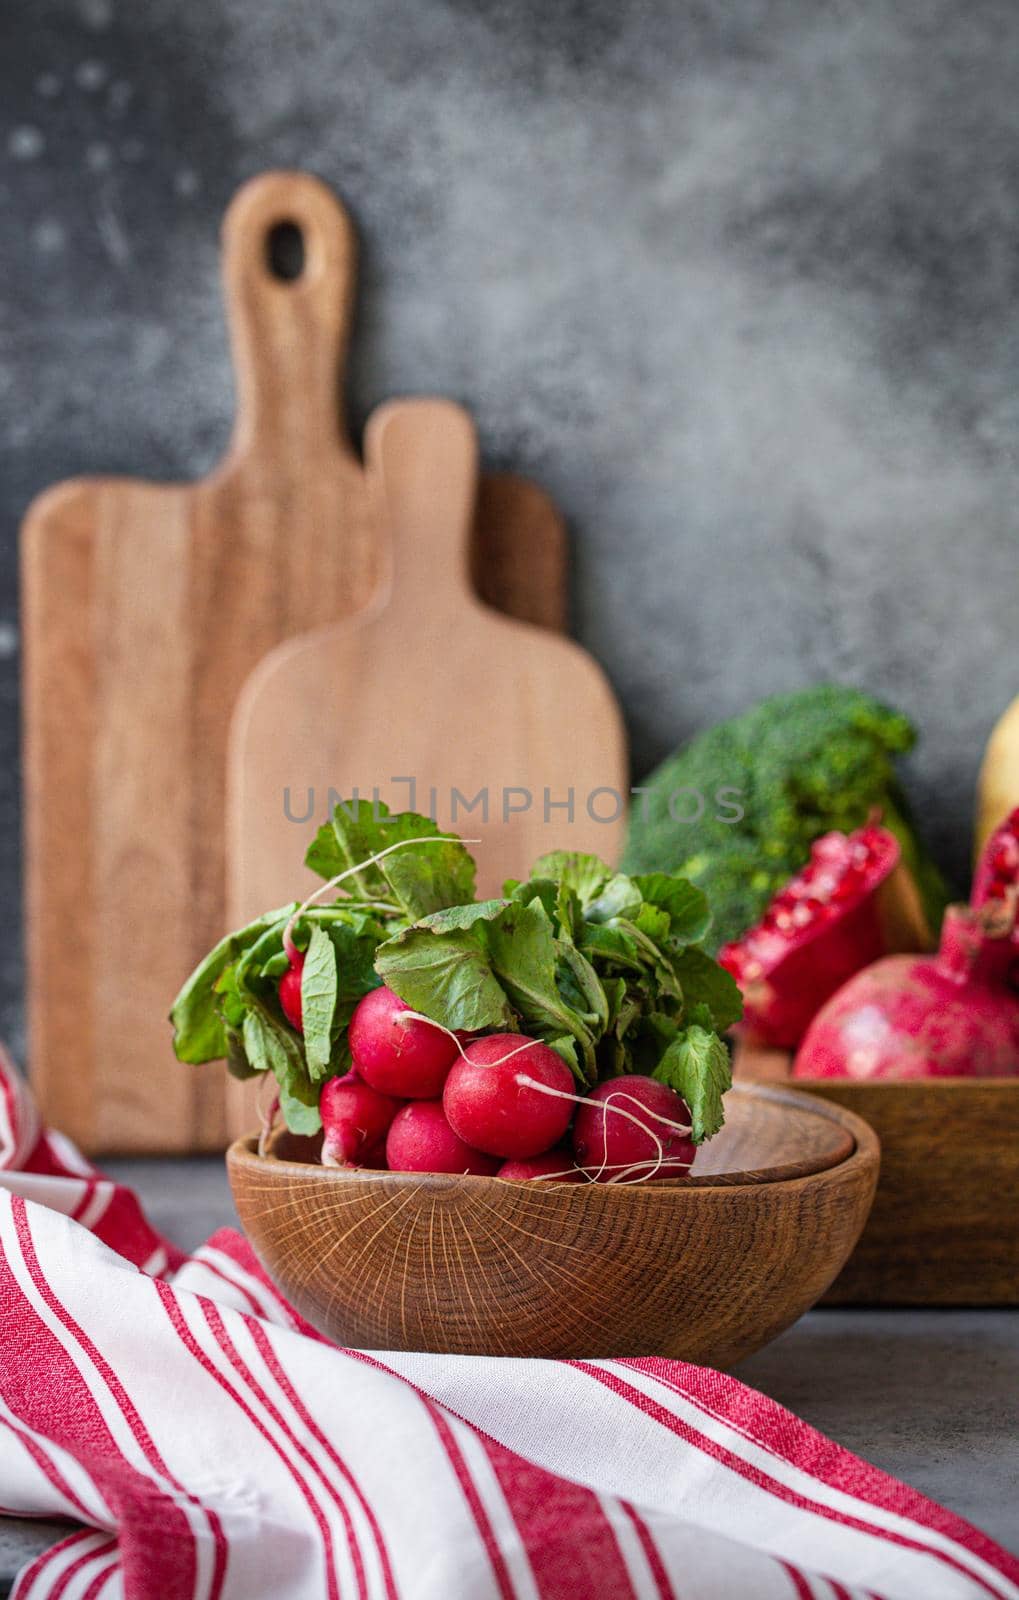 Bunch of fresh raw radish in wooden bowl on kitchen table with fresh fruit, greens, vegetables in wooden tray on grey stone background table, cooking healthy diet vegetarian food meal concept.